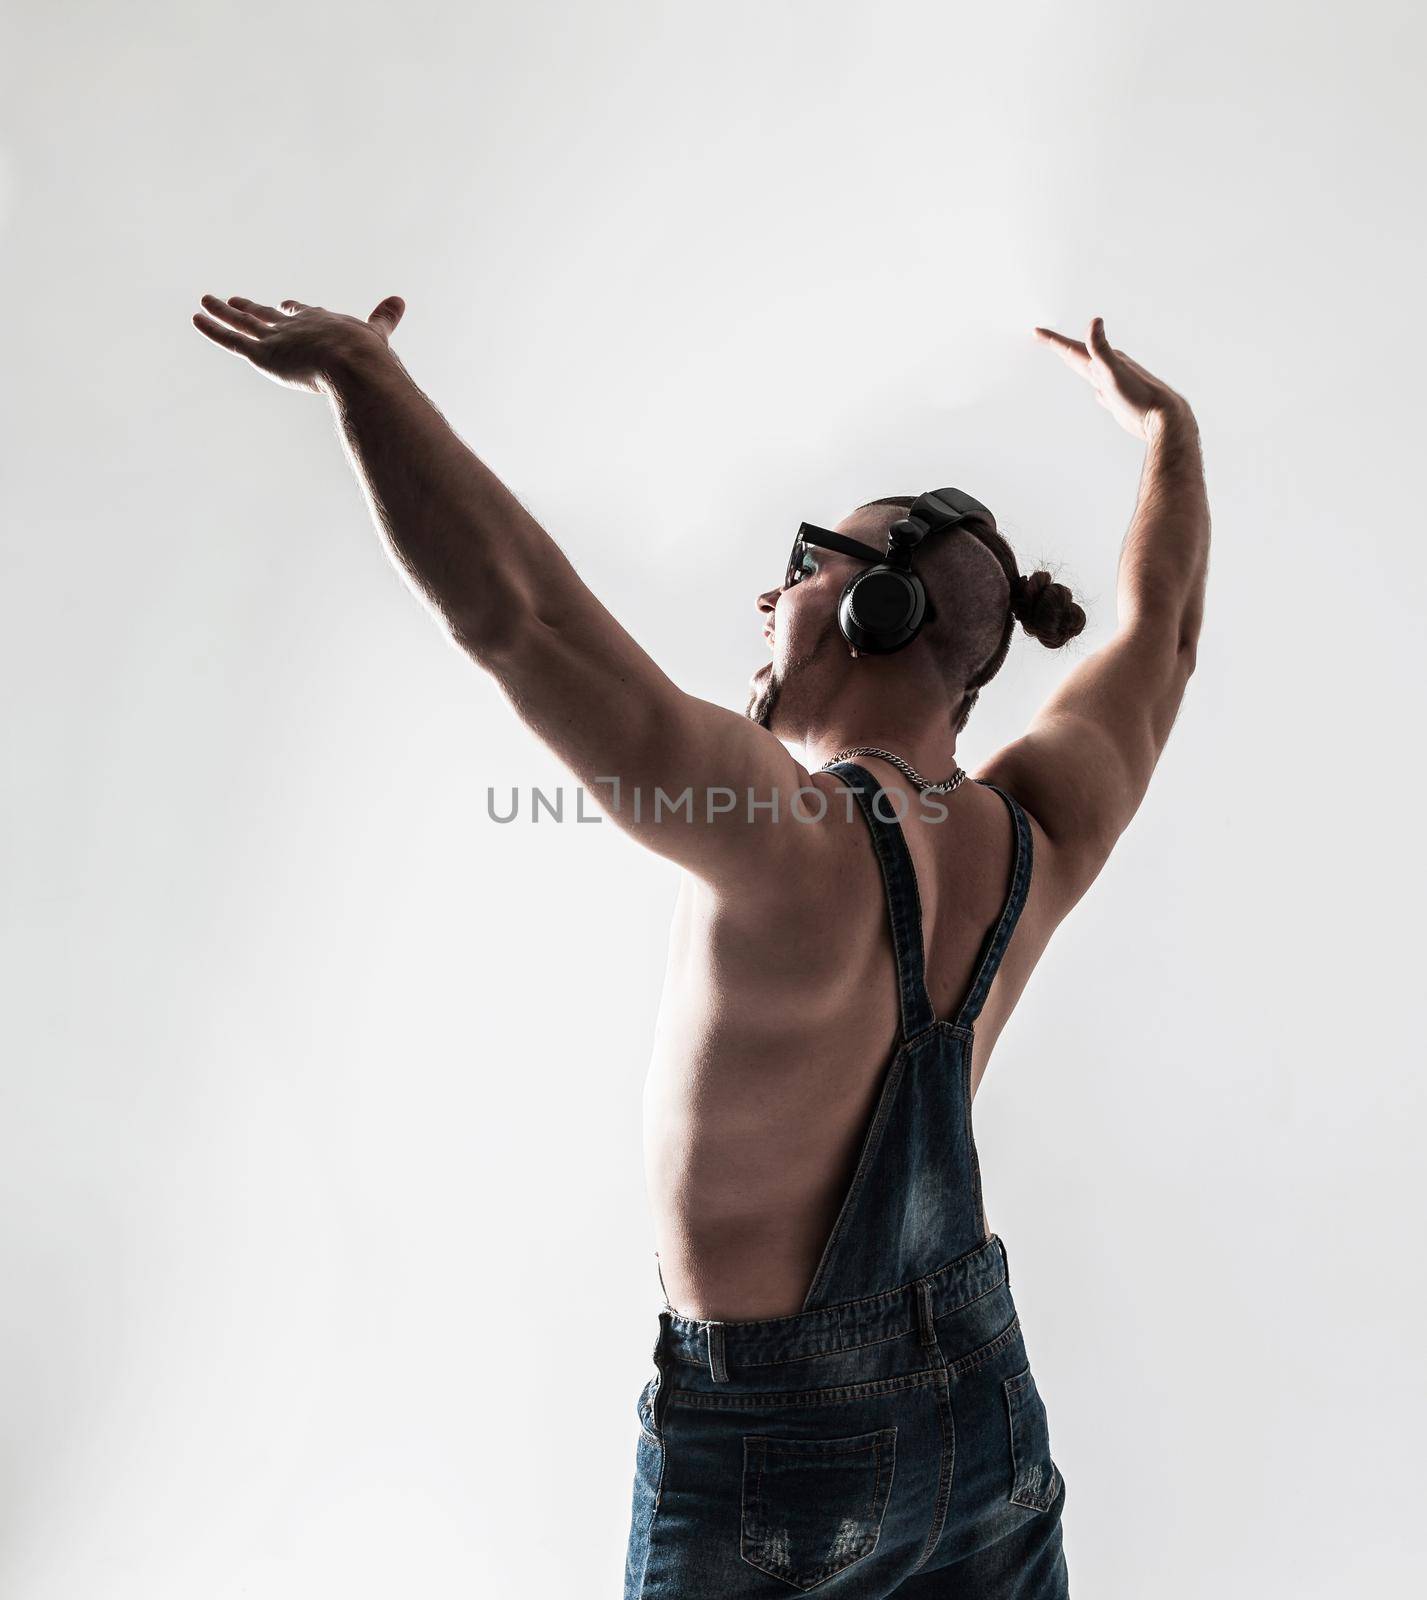 rapper shirtless with headphones and stylish hair and my hands up on a light background . the photo has a empty space for your text